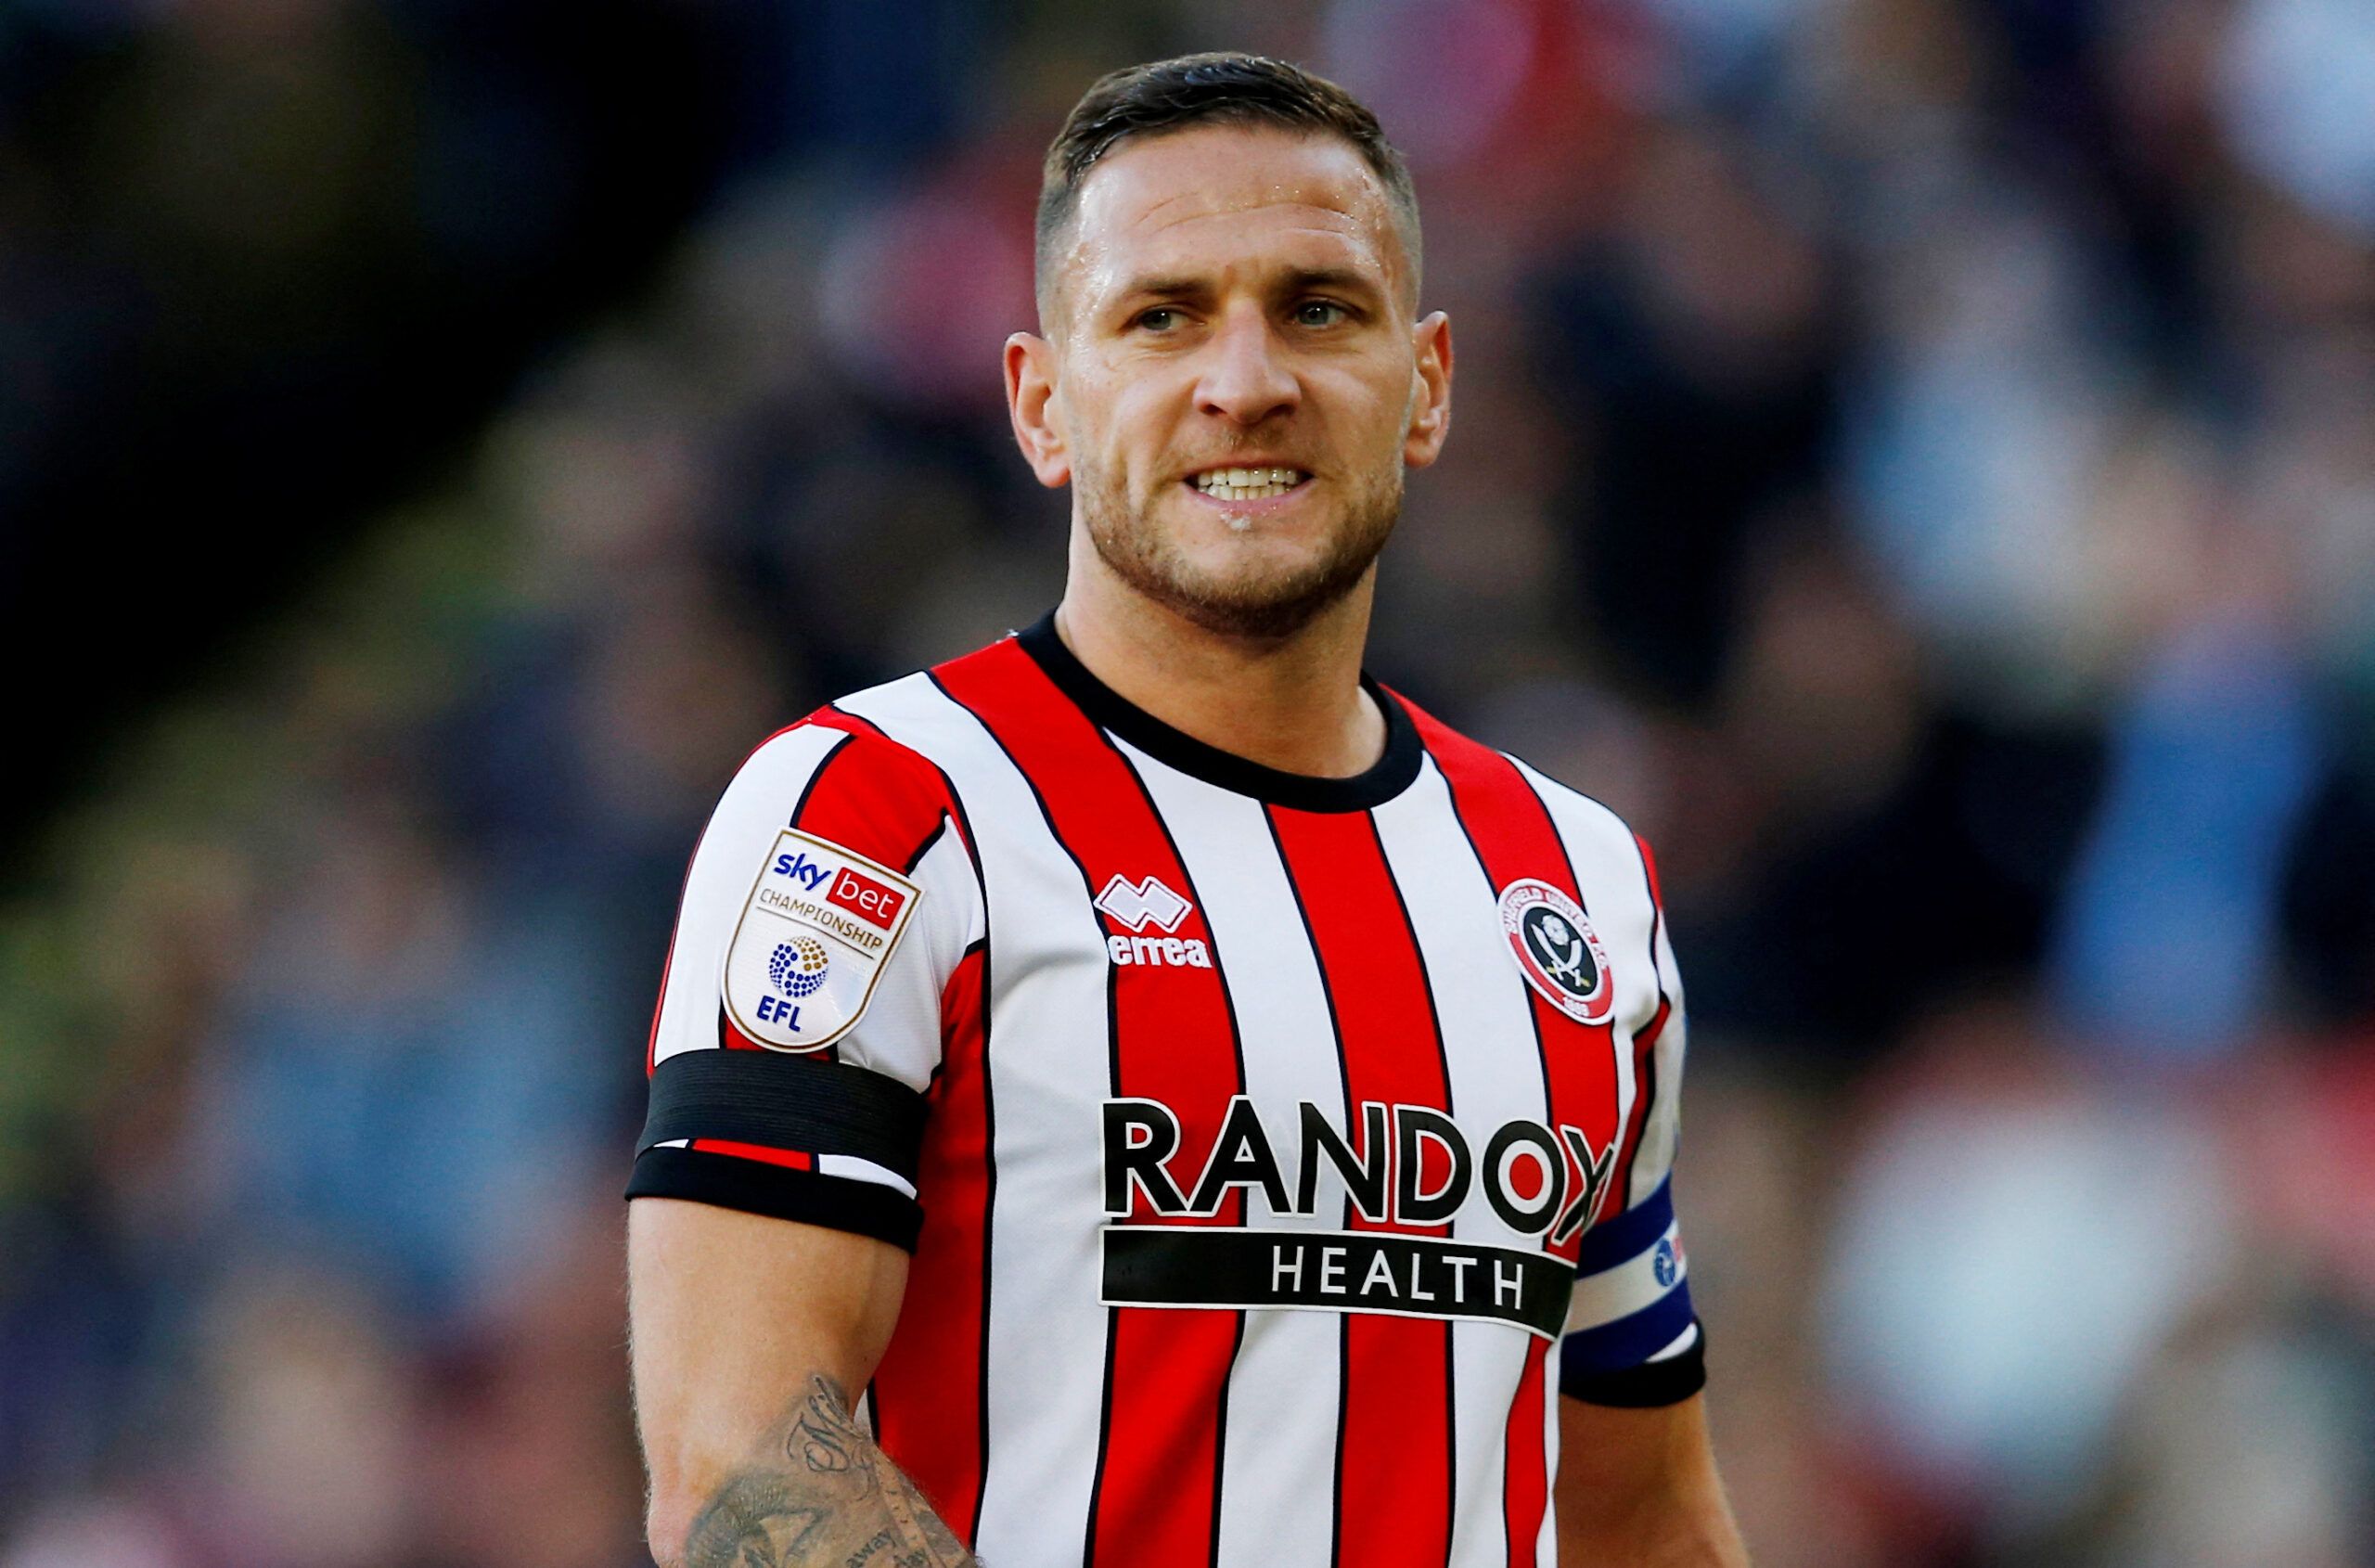 Soccer Football - Championship - Sheffield United v Blackpool - Bramall Lane, Sheffield, Britain - October 15, 2022 Sheffield United's Billy Sharp Action Images/Craig Brough  EDITORIAL USE ONLY. No use with unauthorized audio, video, data, fixture lists, club/league logos or 